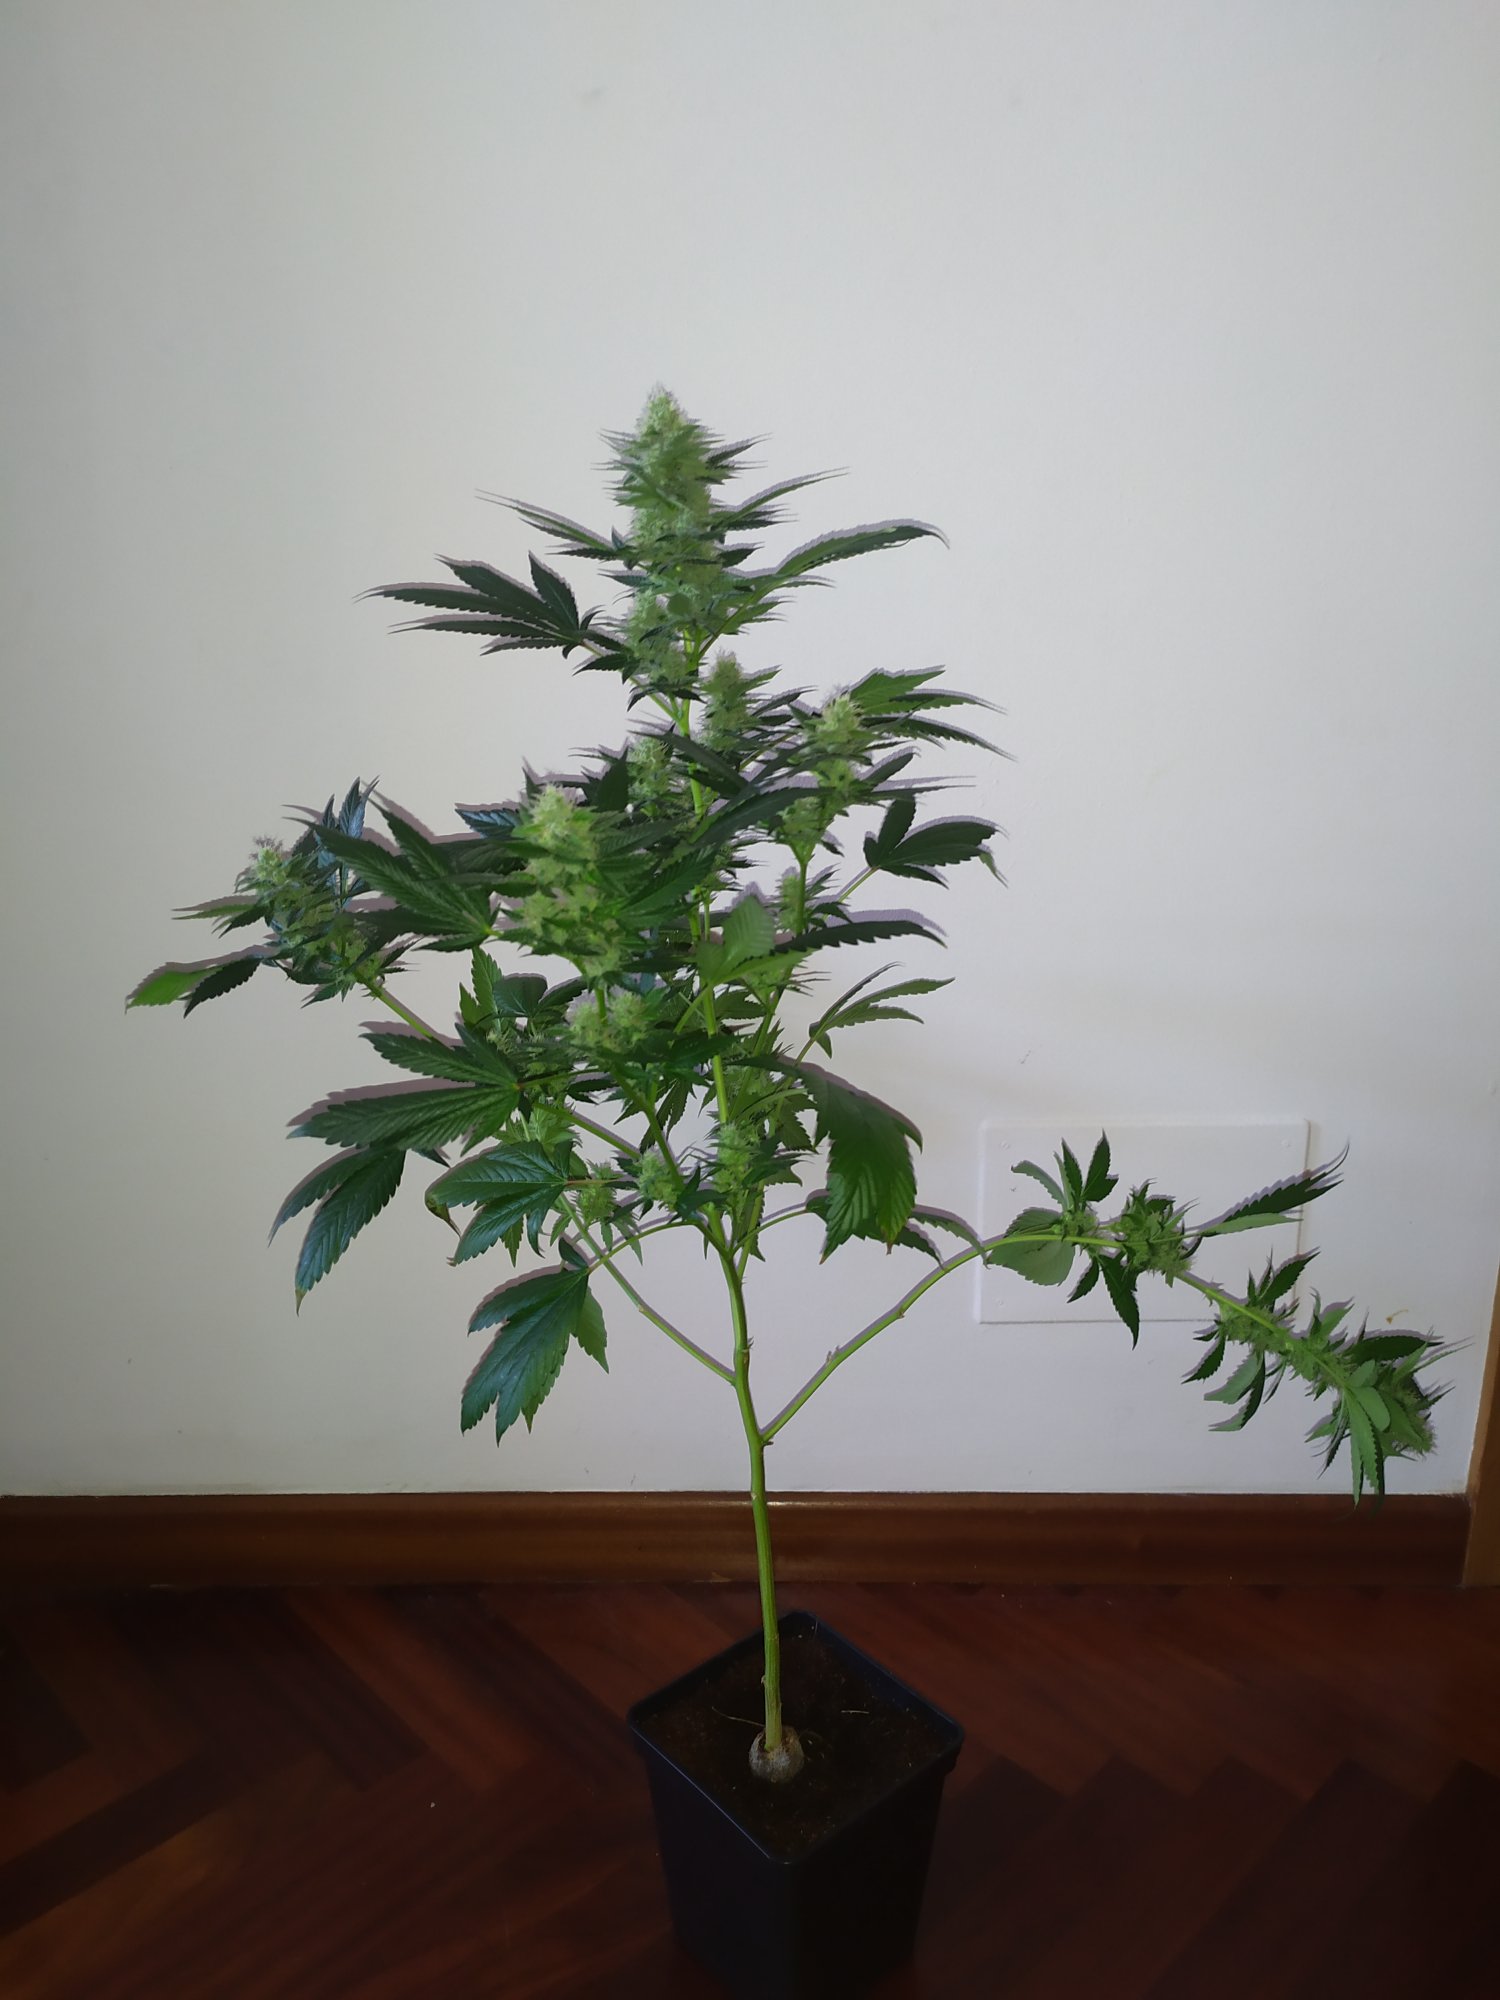 Tips for growing the original gg4 cut 4